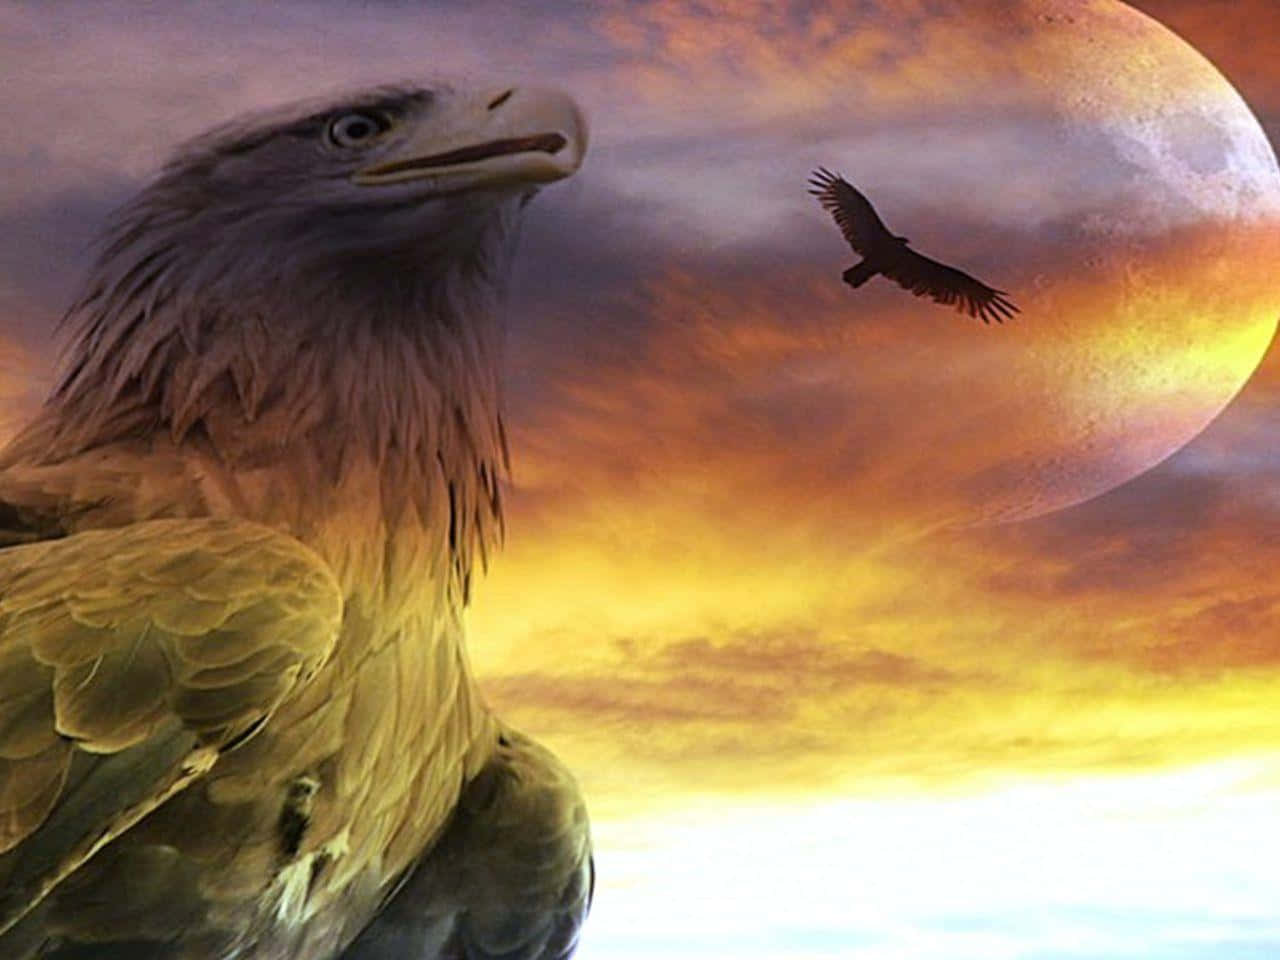 The majestic bald eagle of North America looking into the sky.